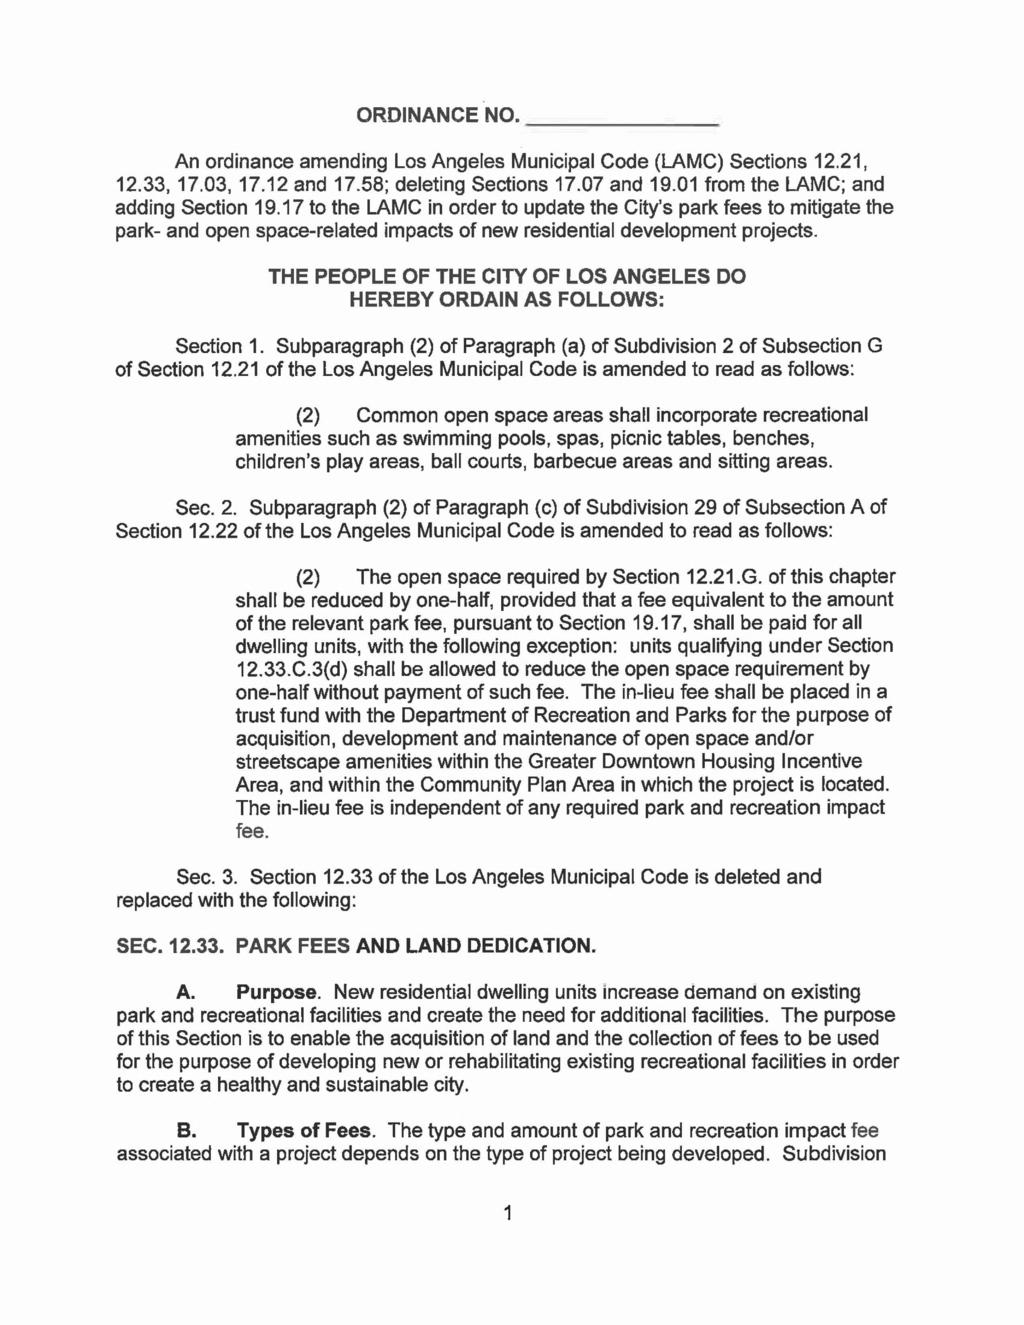 ORDINANCE NO. An ordinance amending Los Angeles Municipal Code (LAMC) Sections 12.21, 12.33,17.03, 17.12 and 17.58; deleting Sections 17.07 and 19.01 from the LAMC; and adding Section 19.